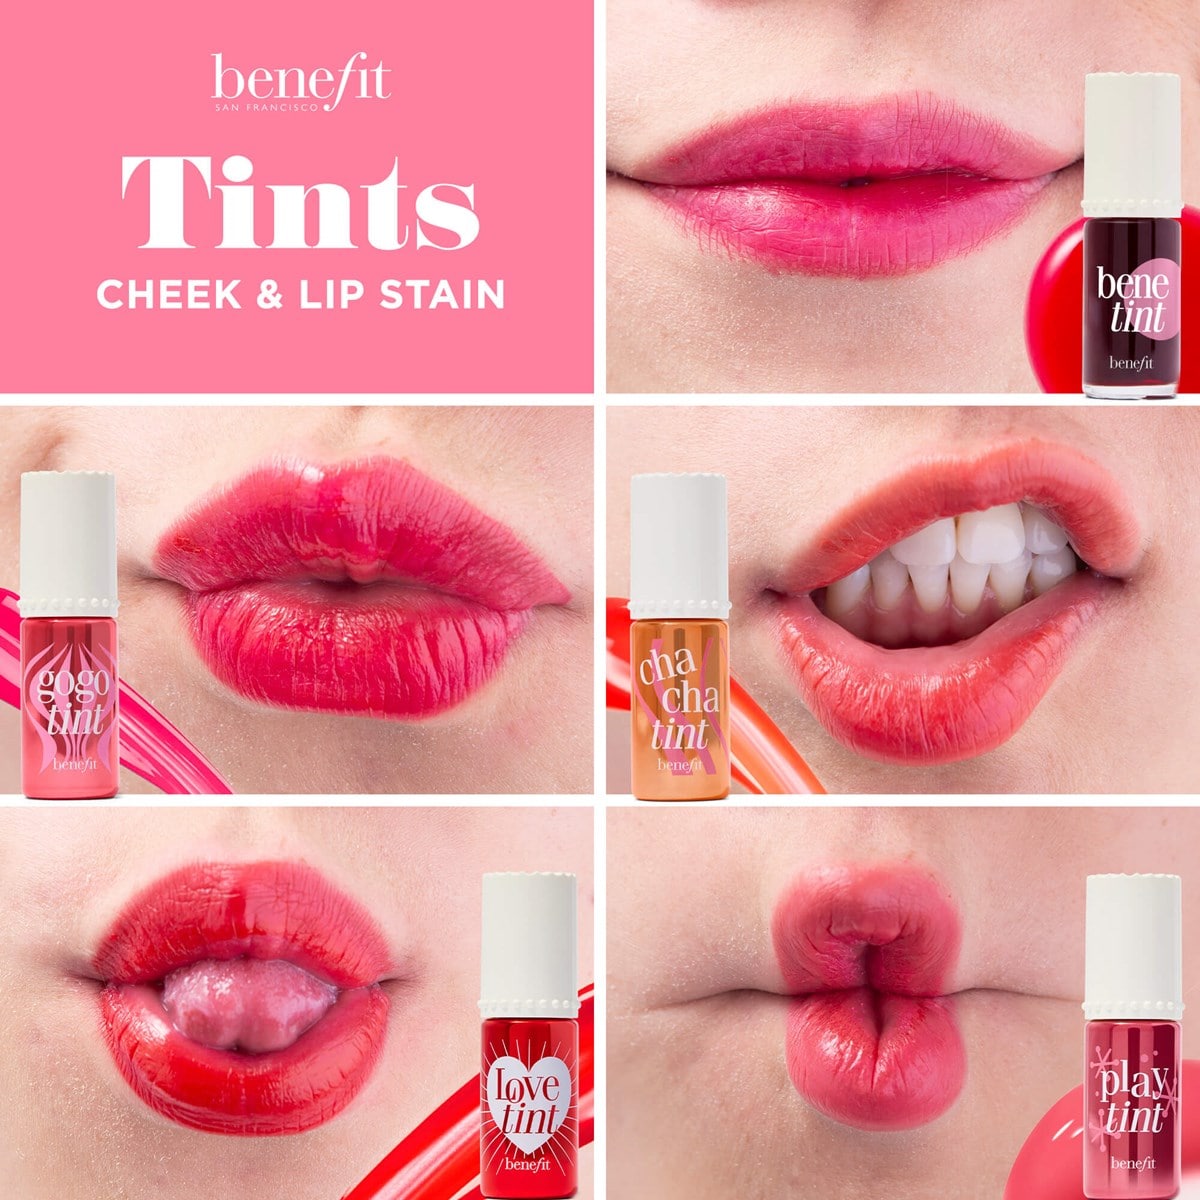 Chachatint Cheek & Lip Stain Mango-tinted lip & cheek stain by Benefit